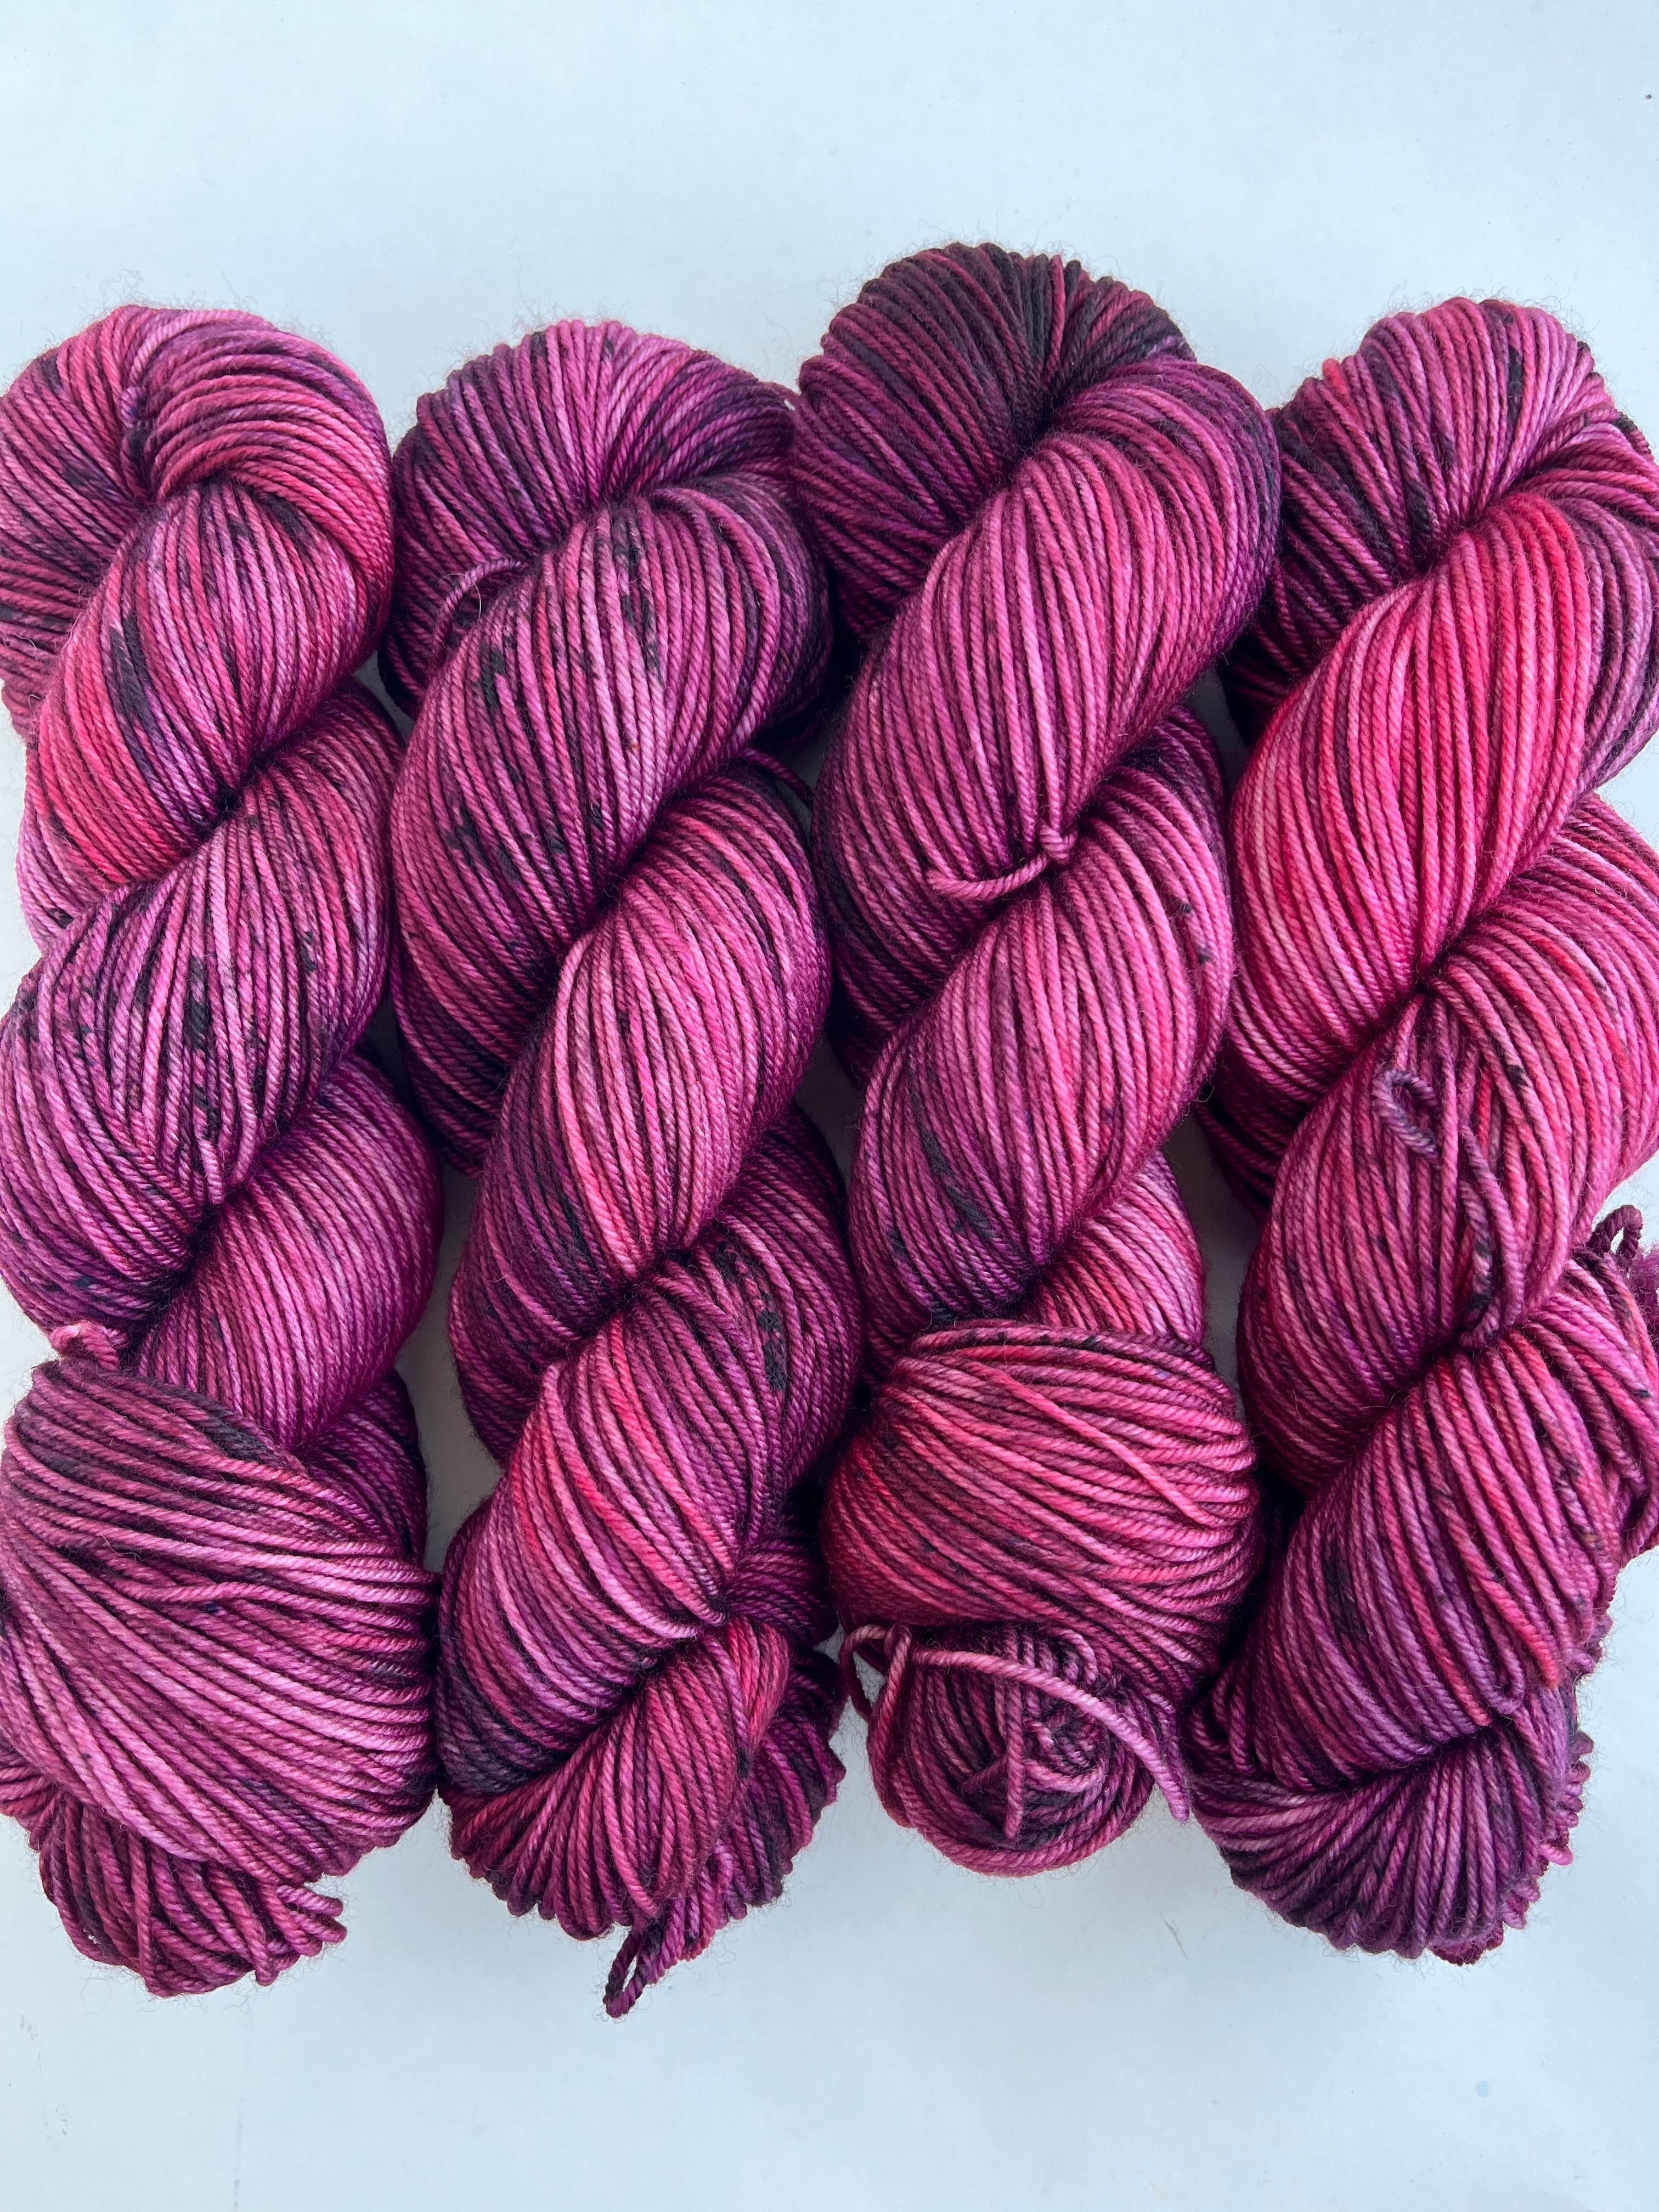 Summer Berries - Tidal DK from Tributary Yarns